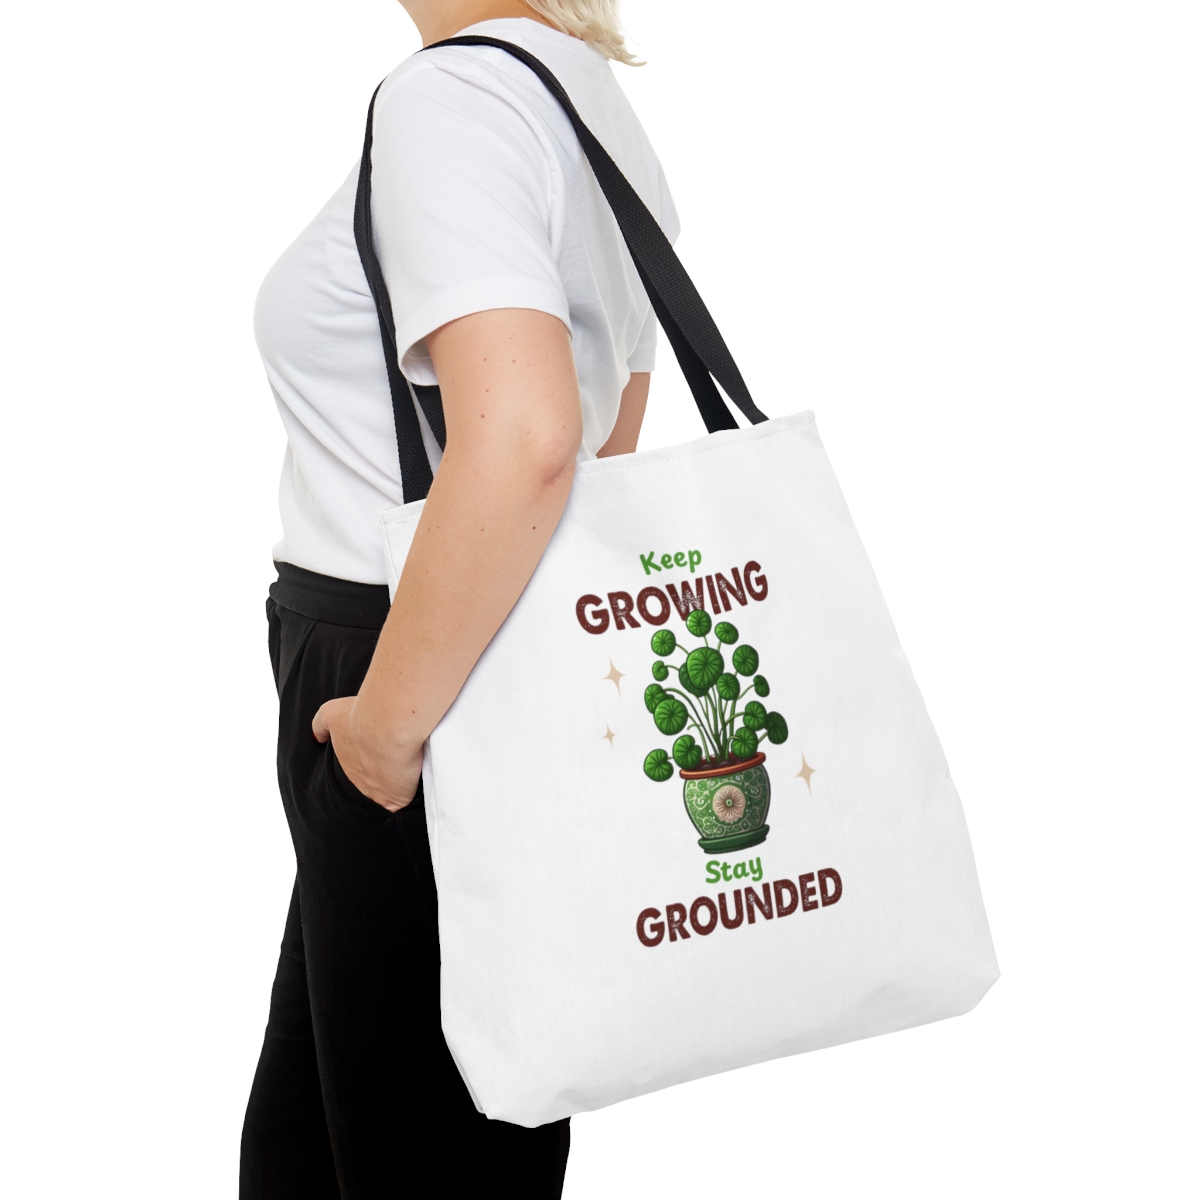 Tote Bag - "Keep Growing & Stay Grounded" product main image